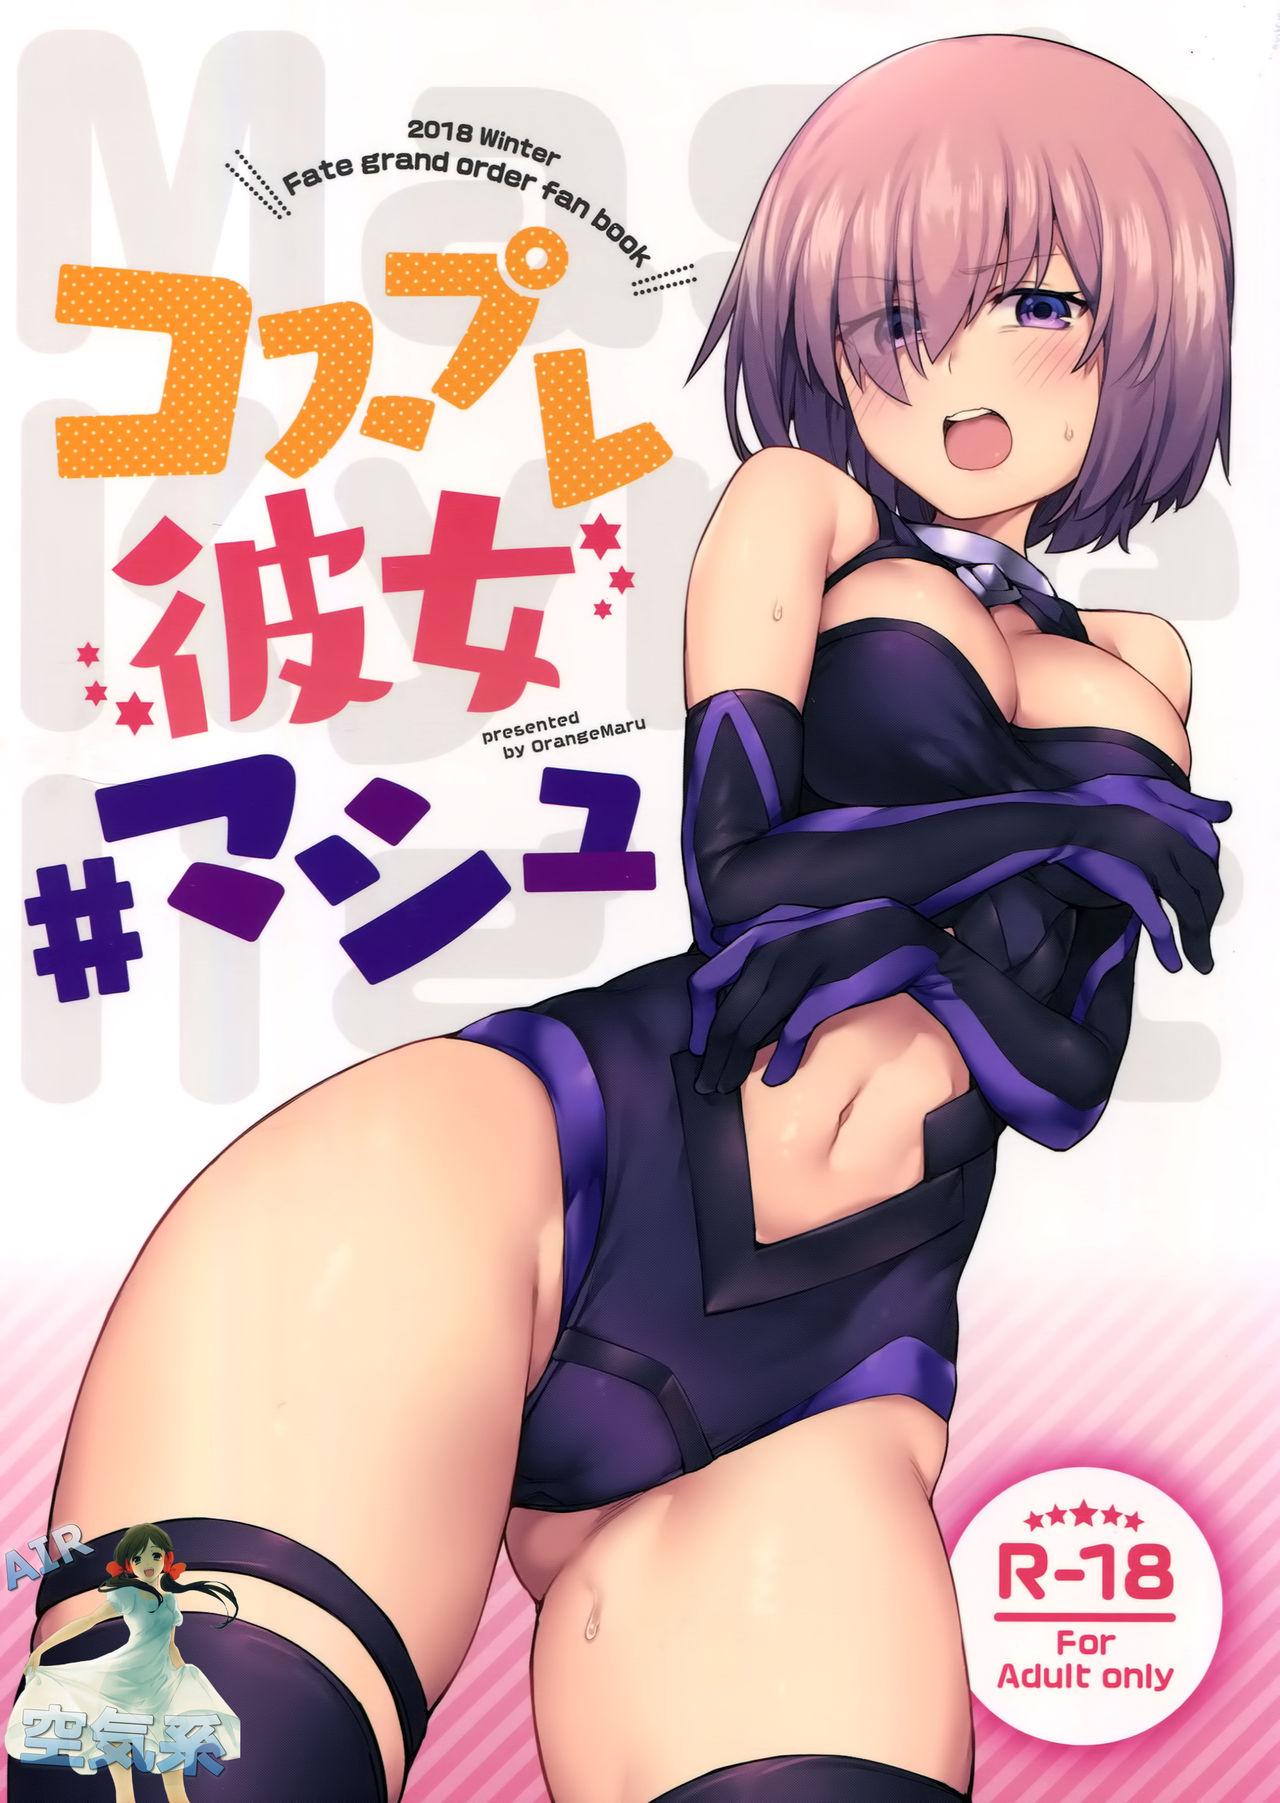 Missionary Position Porn Cosplay Kanojo #Mash - Fate grand order Flaquita - Page 2